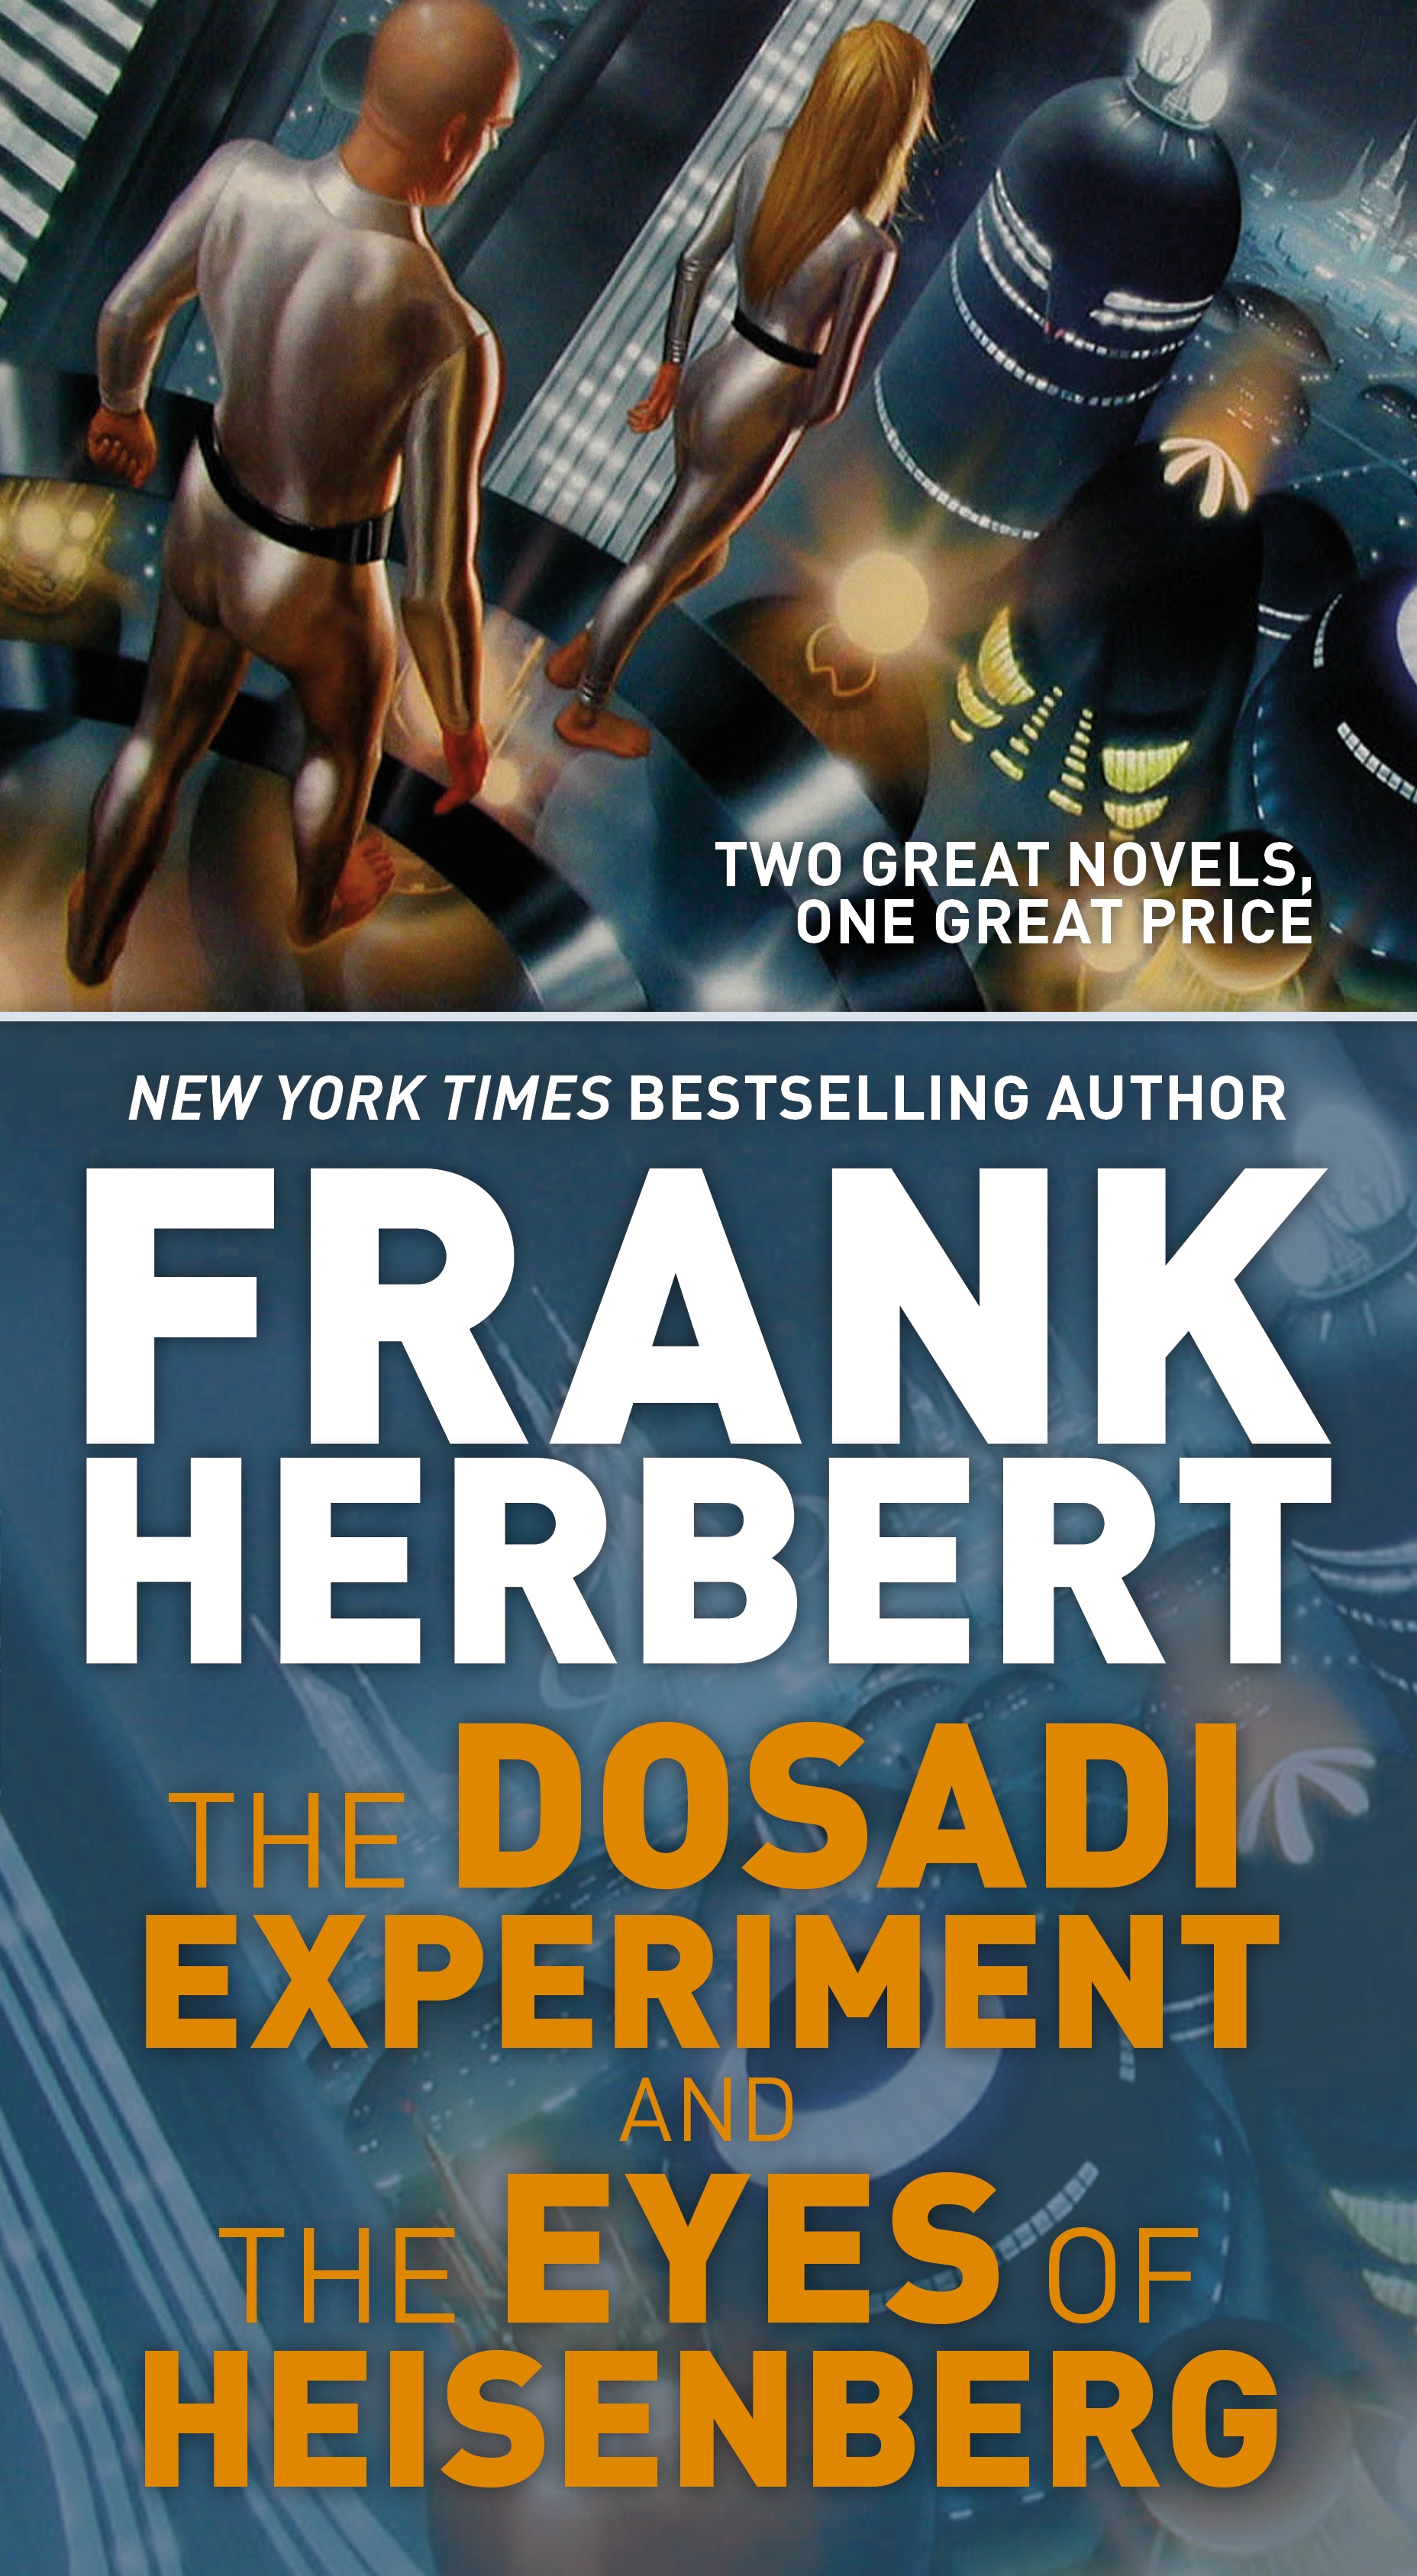 The Dosadi Experiment and The Eyes of Heisenberg : Two Classic Works of Science Fiction by Frank Herbert